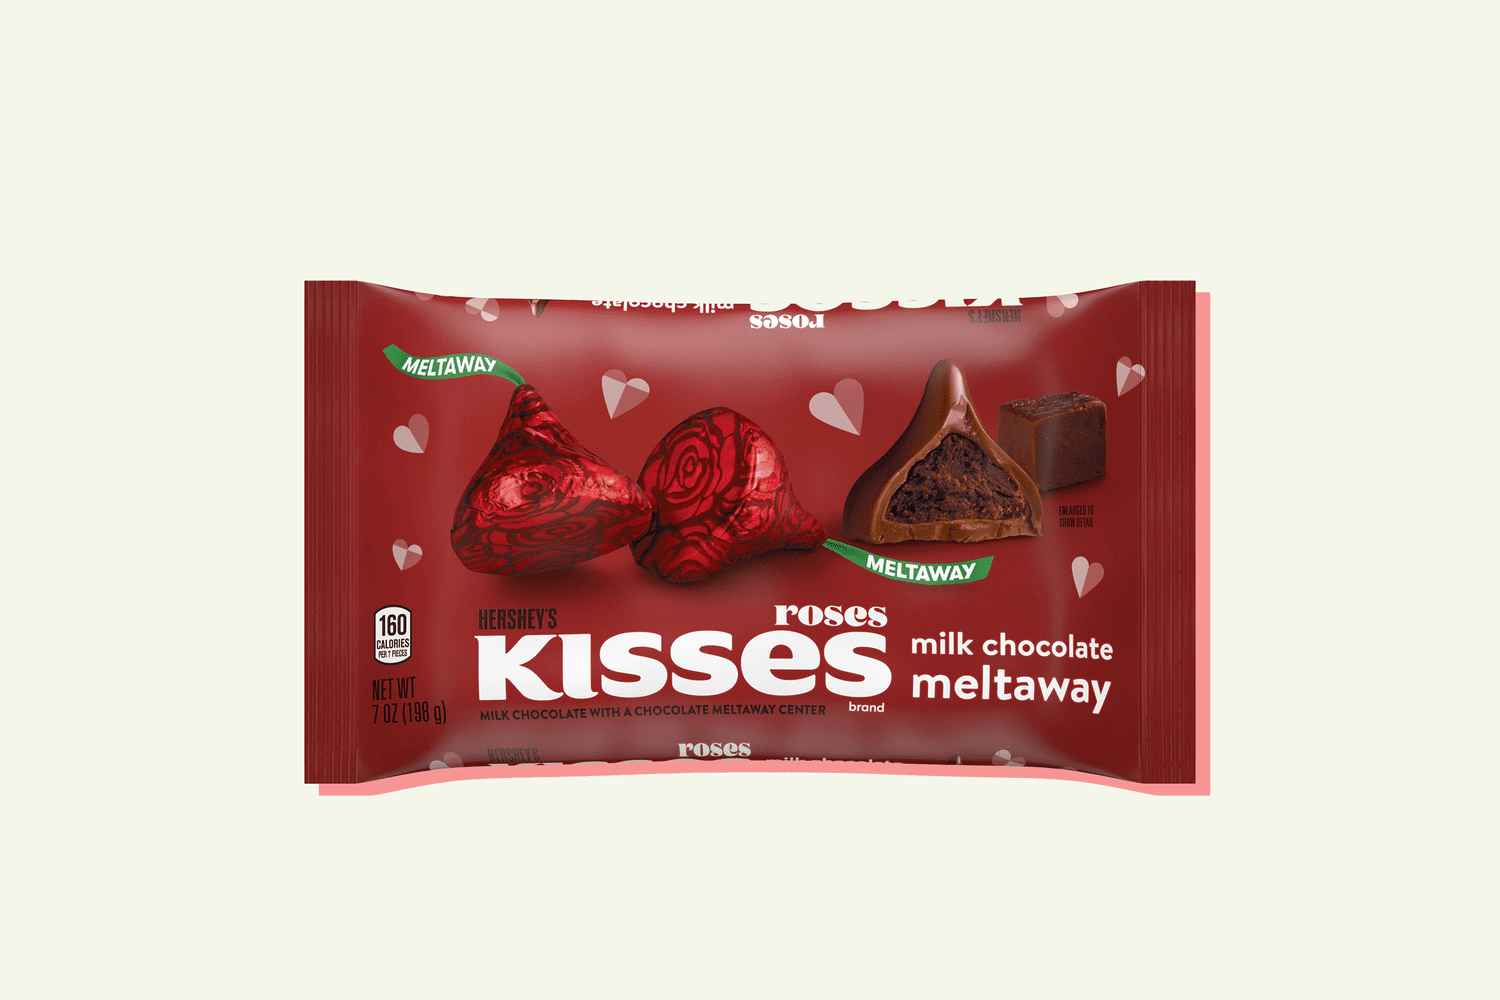 Hershey&rsquo;s Kisses Meltaway Roses